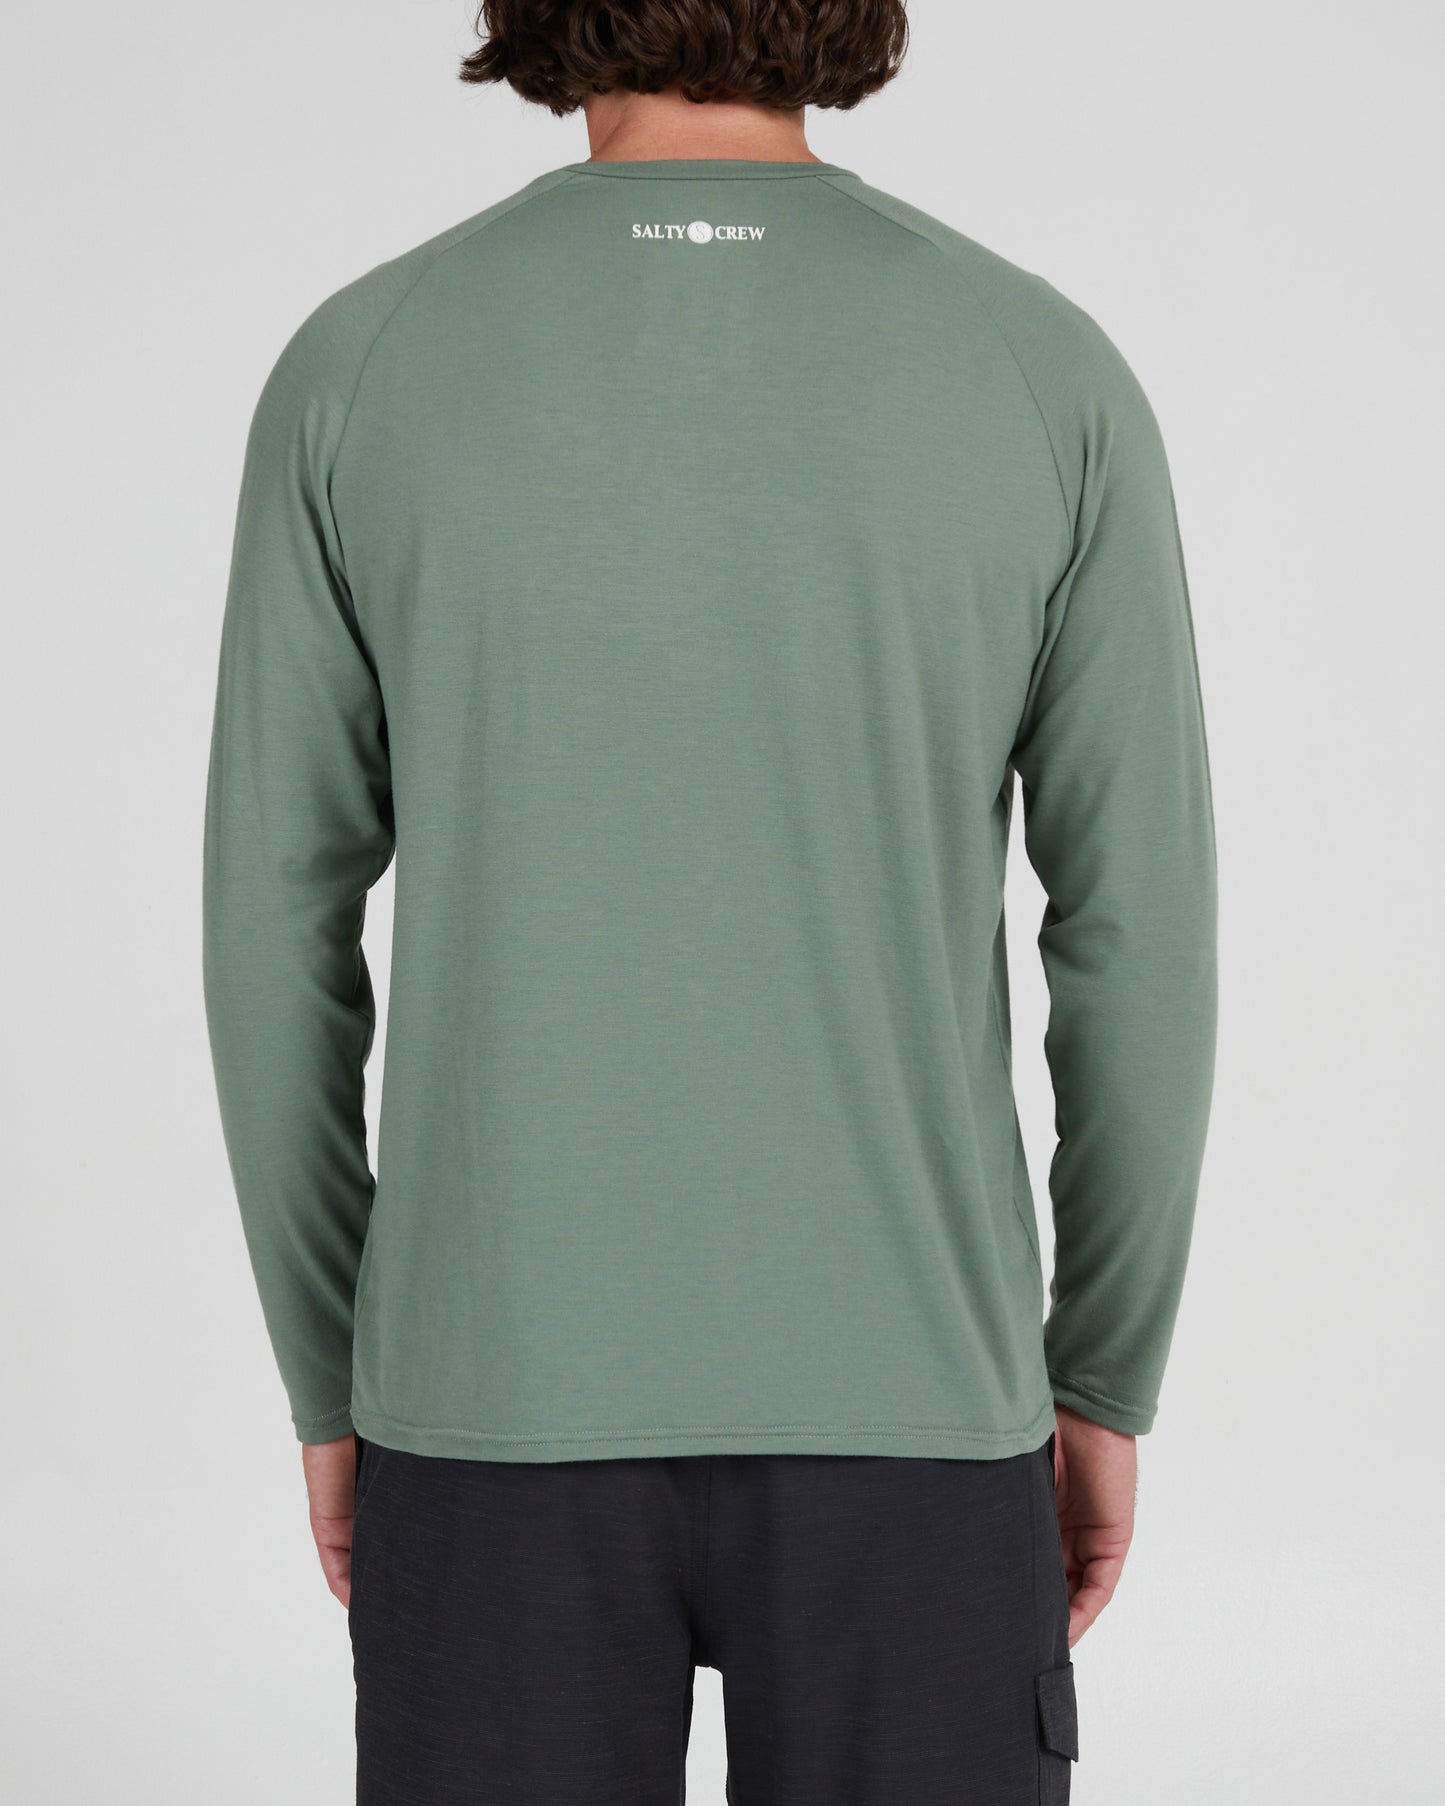 back view of Mariner UV Fatigue L/S Tee